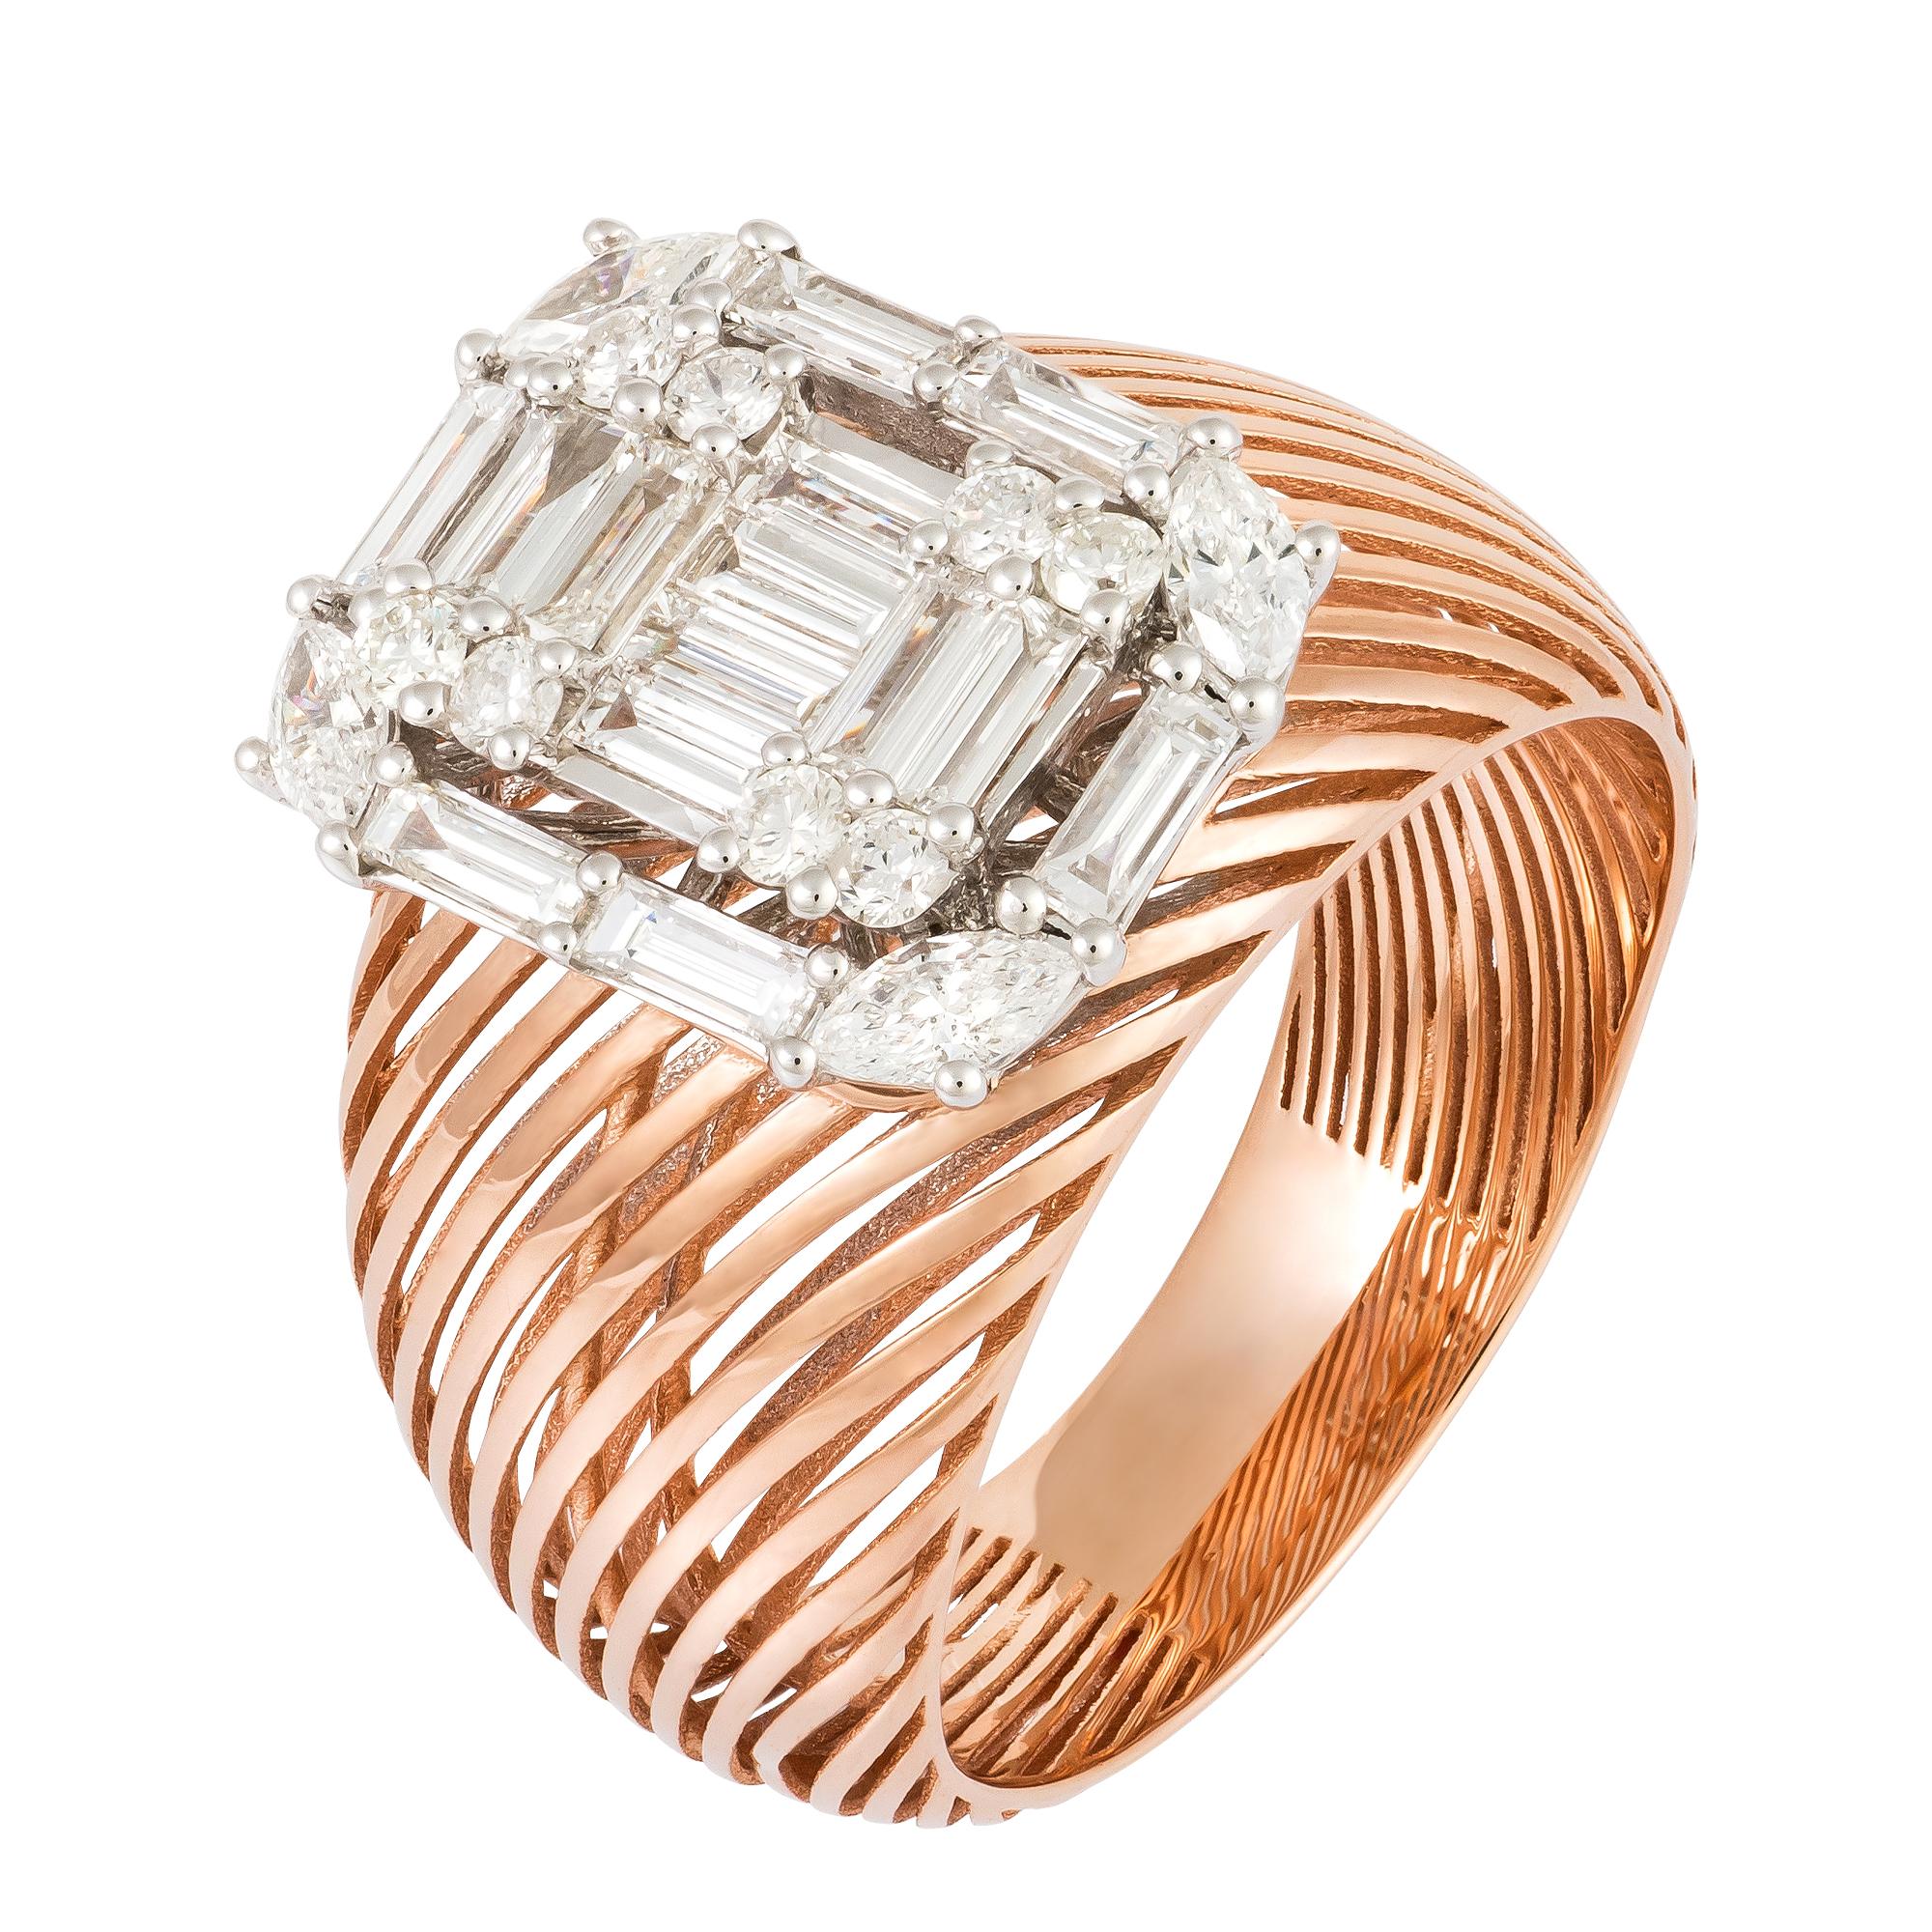 For Sale:  Evening White Pink 18K Gold White Diamond Ring For Her 3